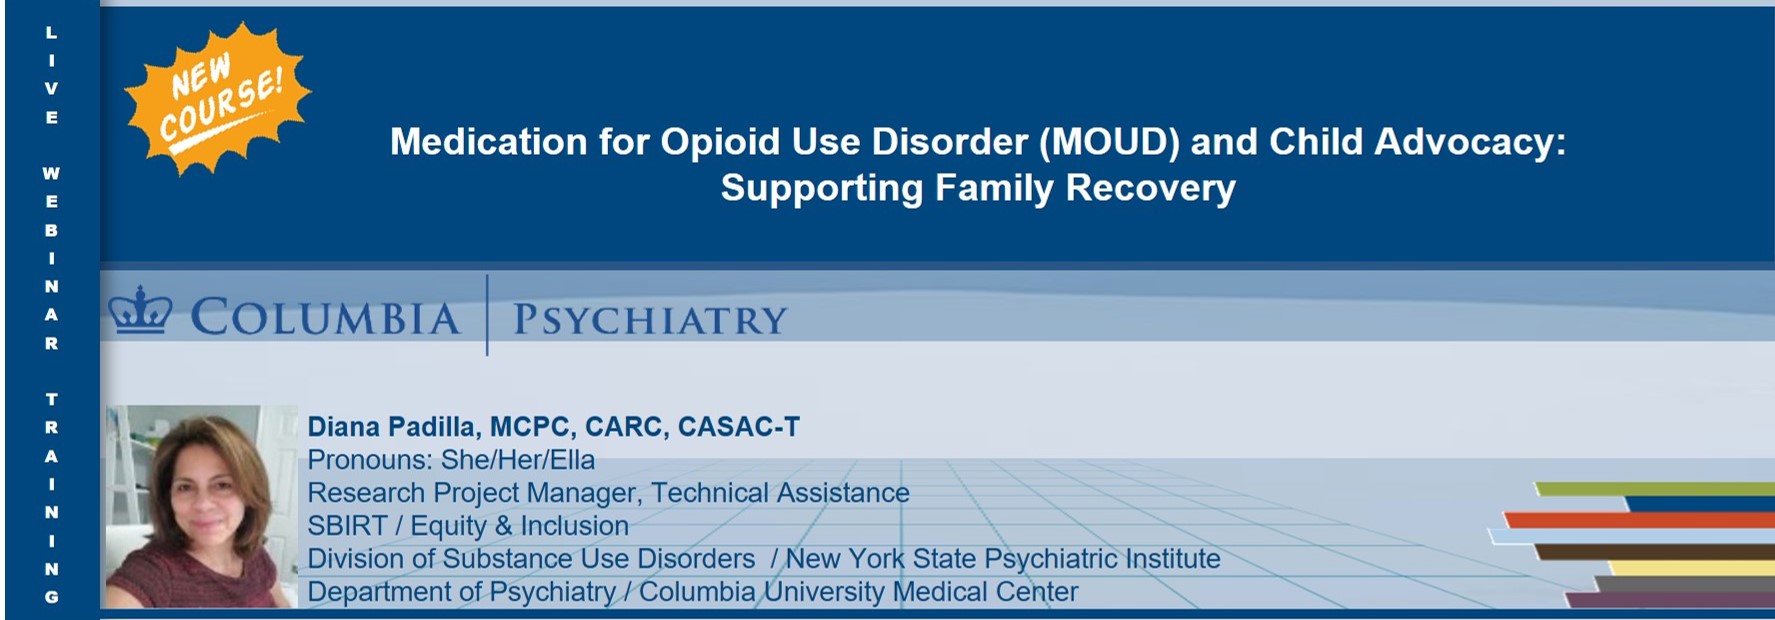 Medications for Opioid Use Disorder (MOUD)